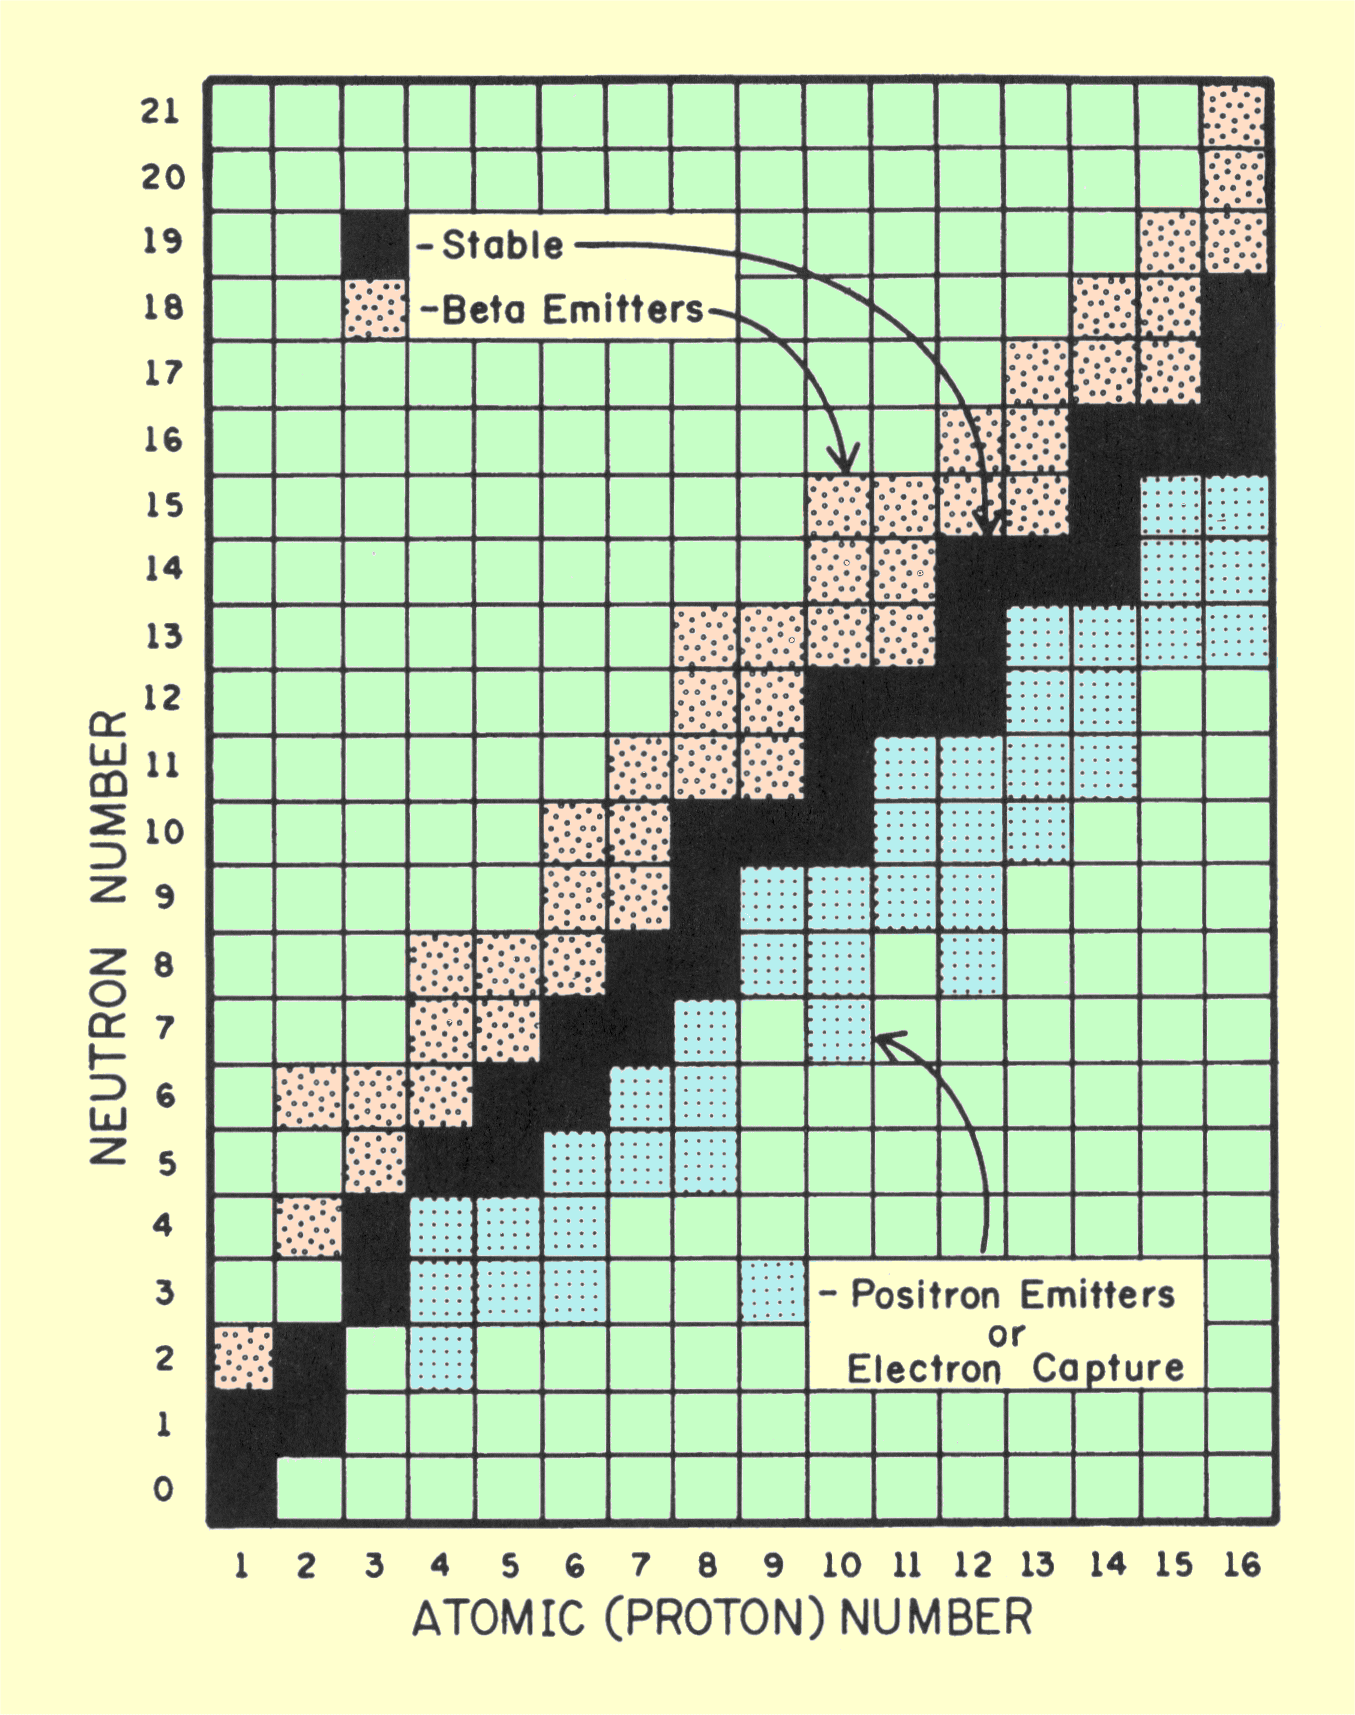 Nuclide Chart Showing the Relationship between Radioactive and Stable Nuclides